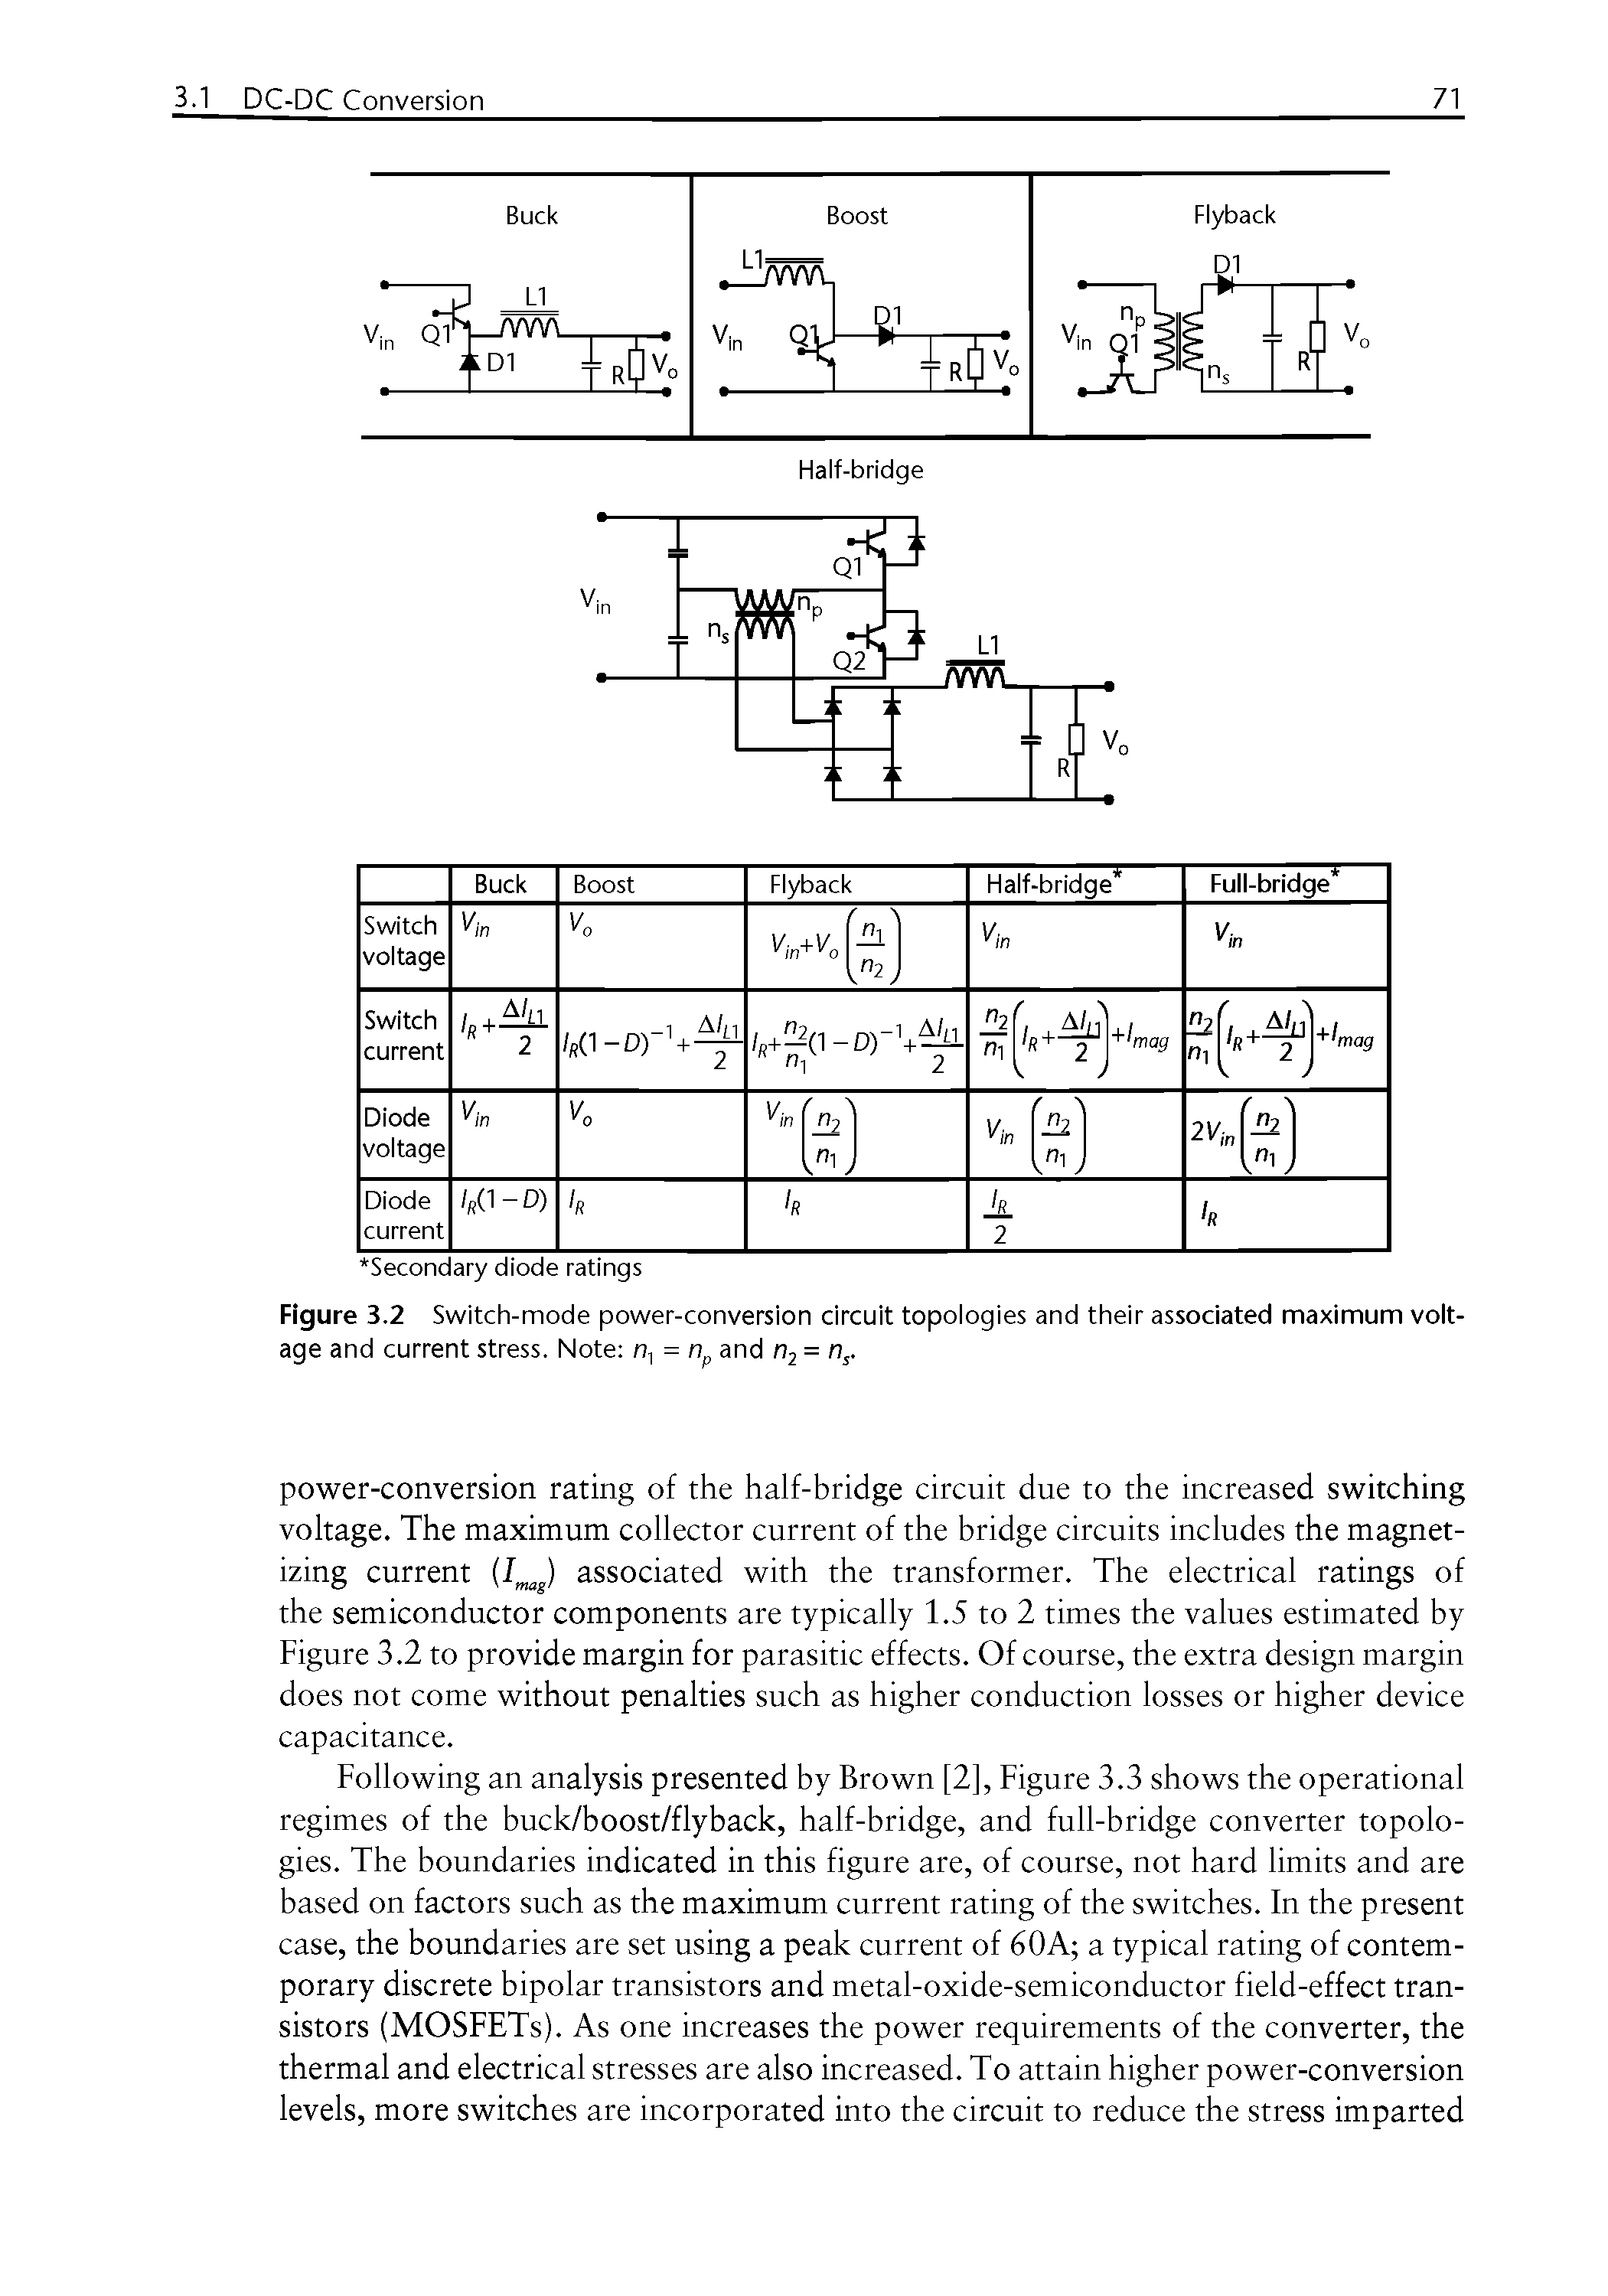 Figure 3.2 Switch-mode power-conversion circuit topologies and their associated maximum voltage and current stress. Note n, = n and Oj = n. ...